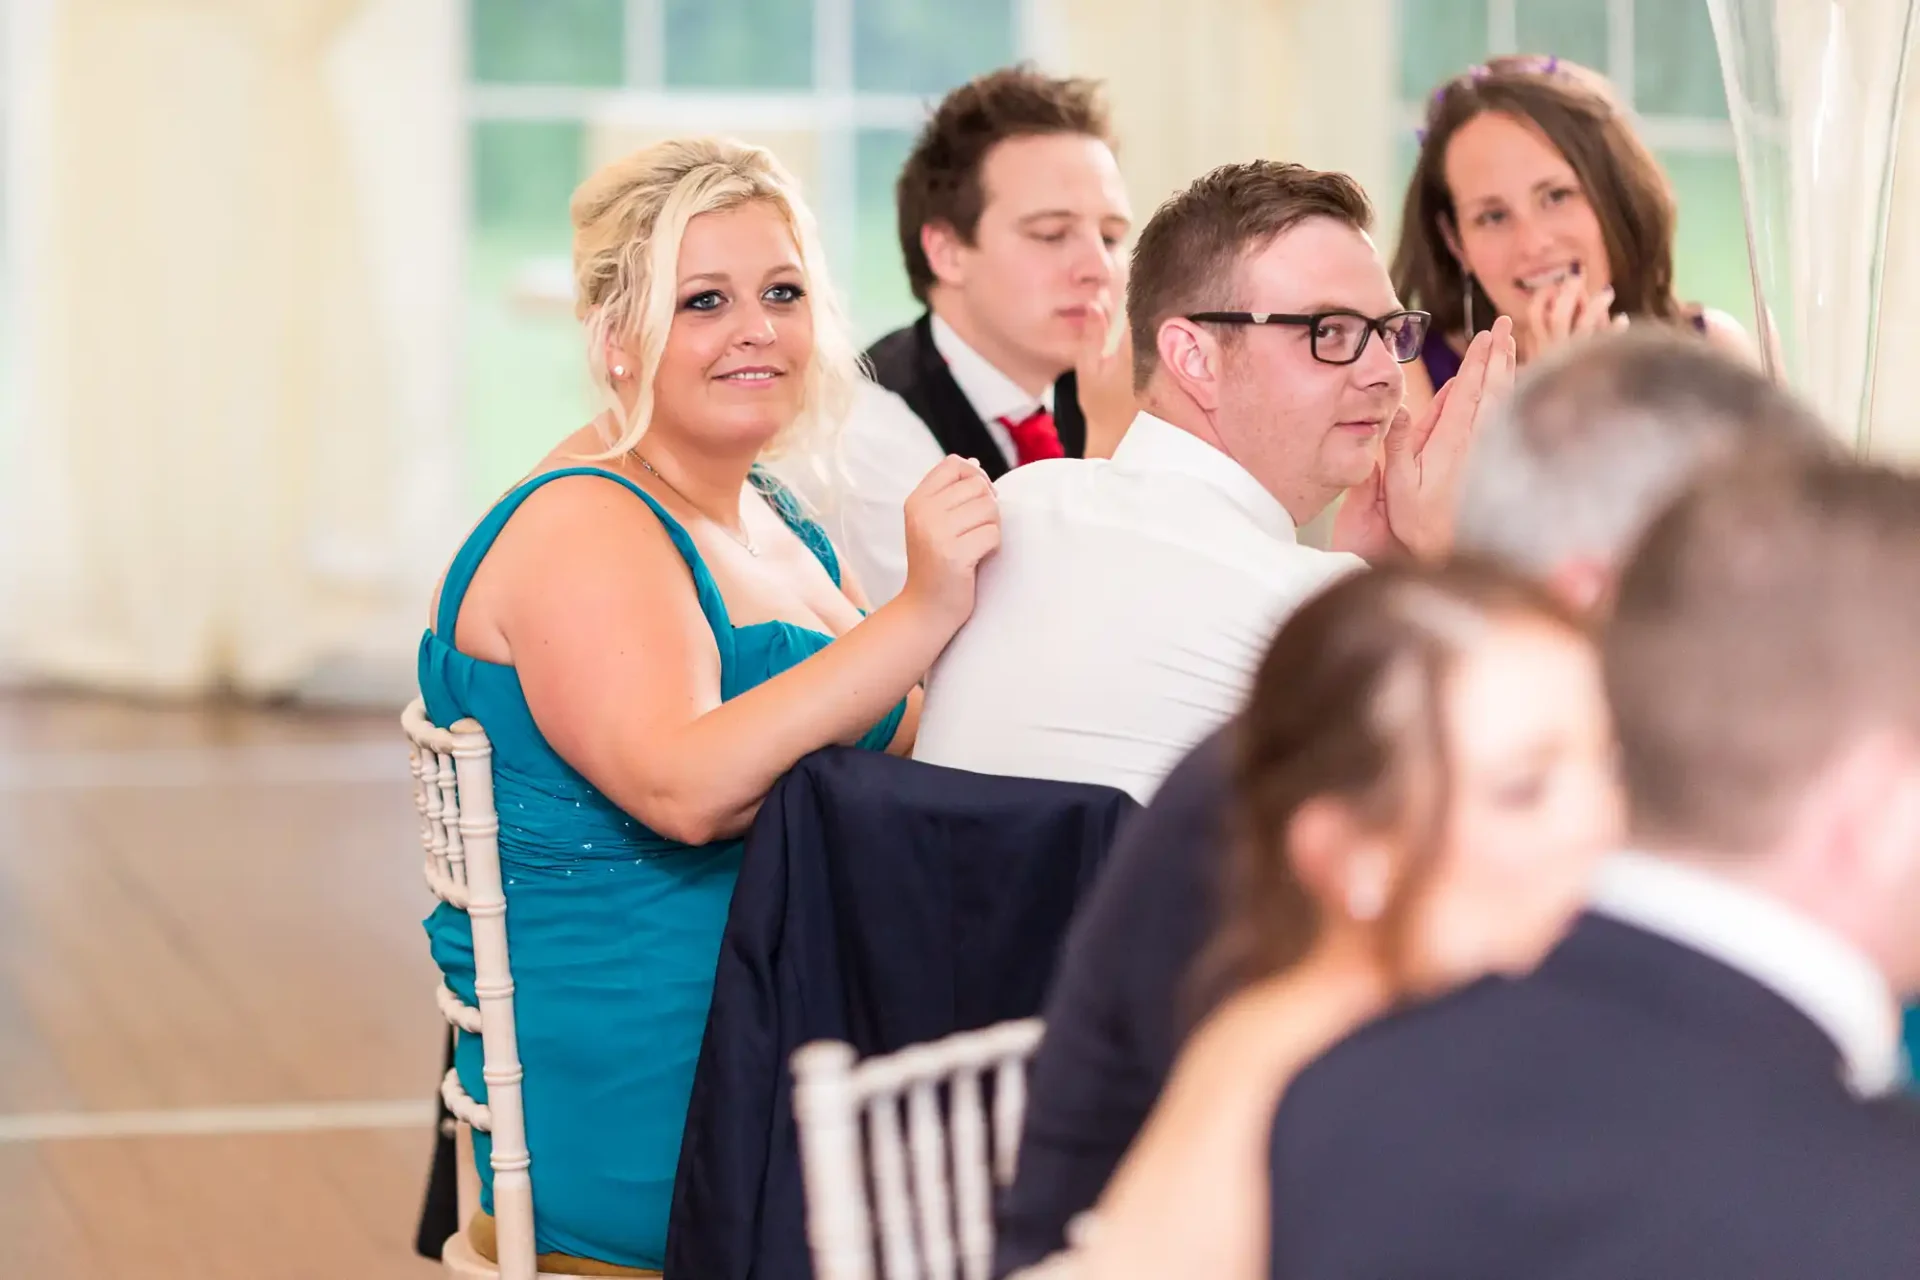 A group of guests at a wedding reception, focused on events off-camera, with one woman in a turquoise dress looking directly at the camera.